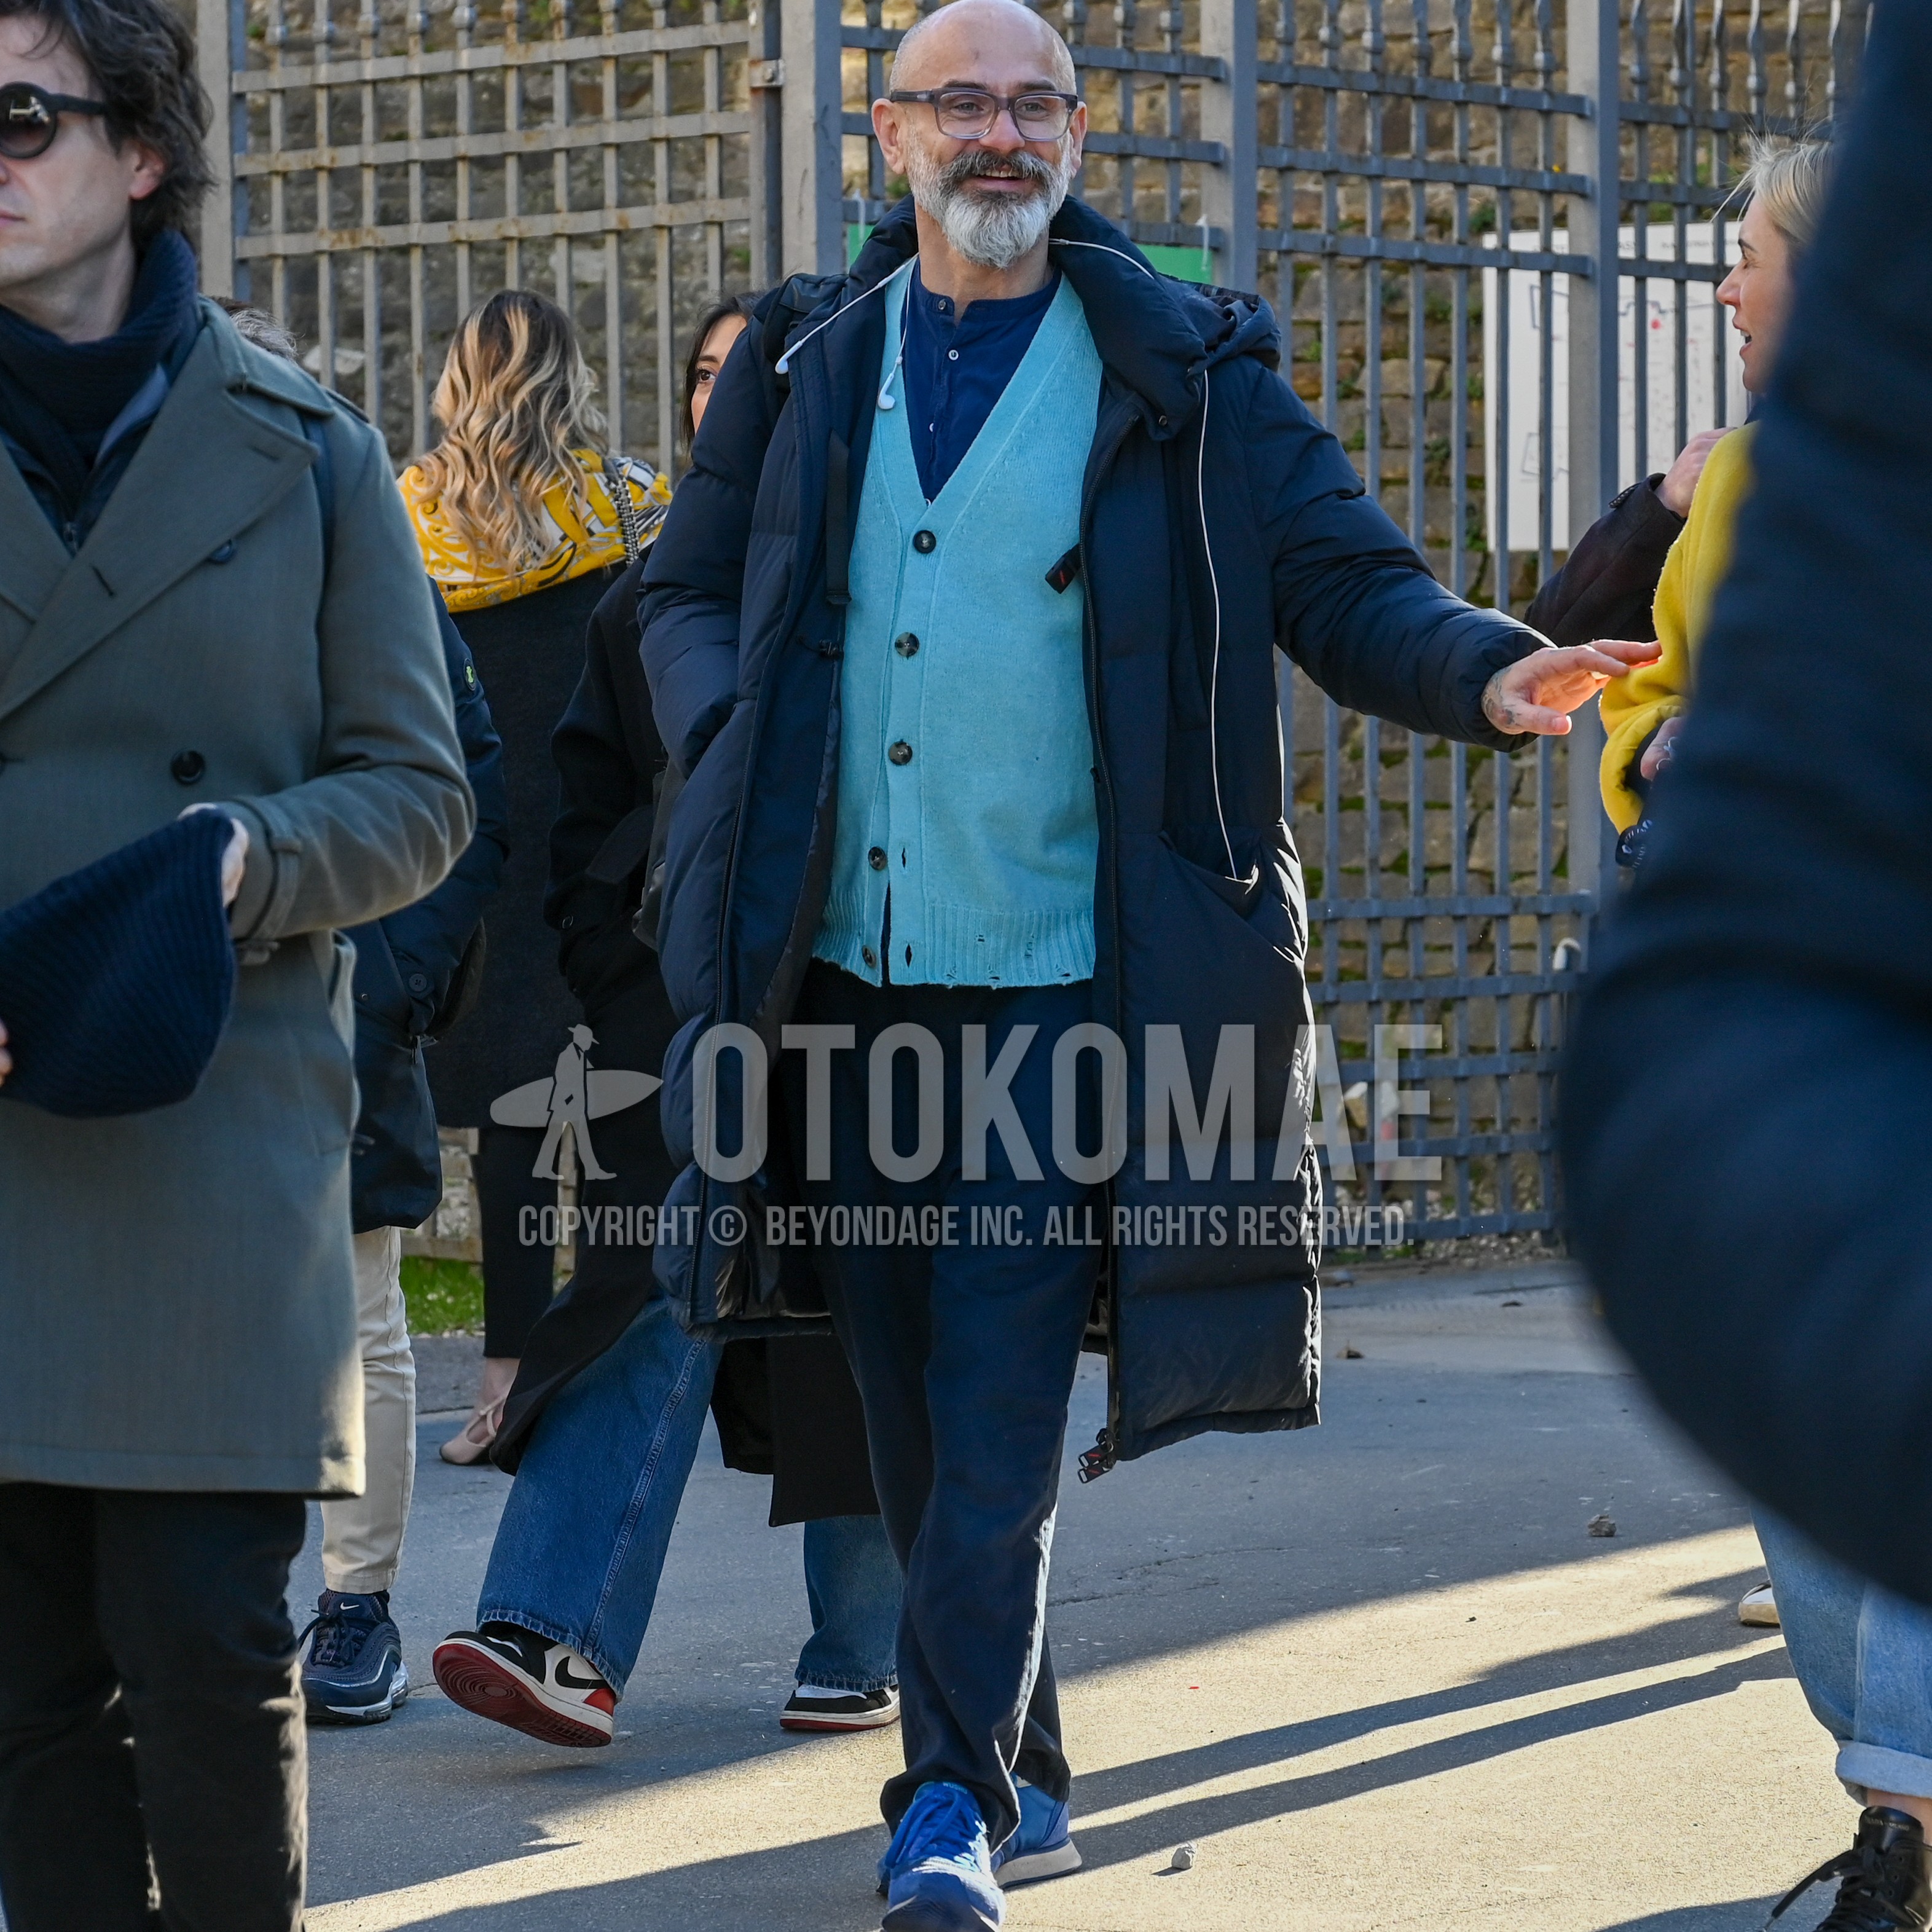 Men's autumn winter outfit with gray eyewear glasses, navy plain hooded coat, light blue plain cardigan, navy plain shirt, navy plain chinos, blue low-cut sneakers.